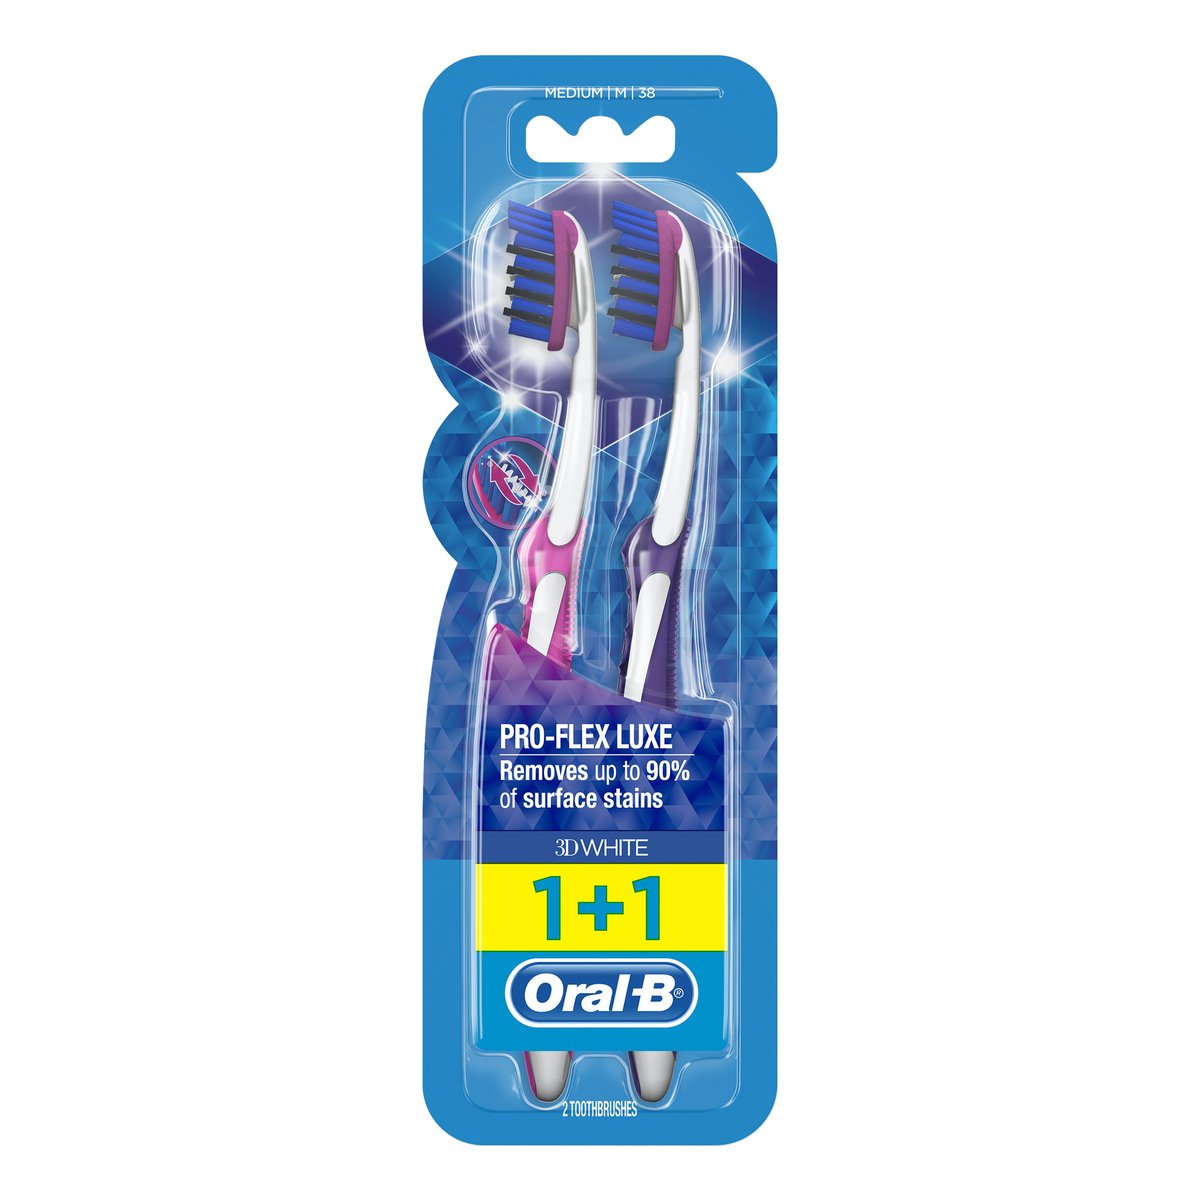 Oral B Proflex Luxe Medium Toothbrush Assorted Colour 1 + 1